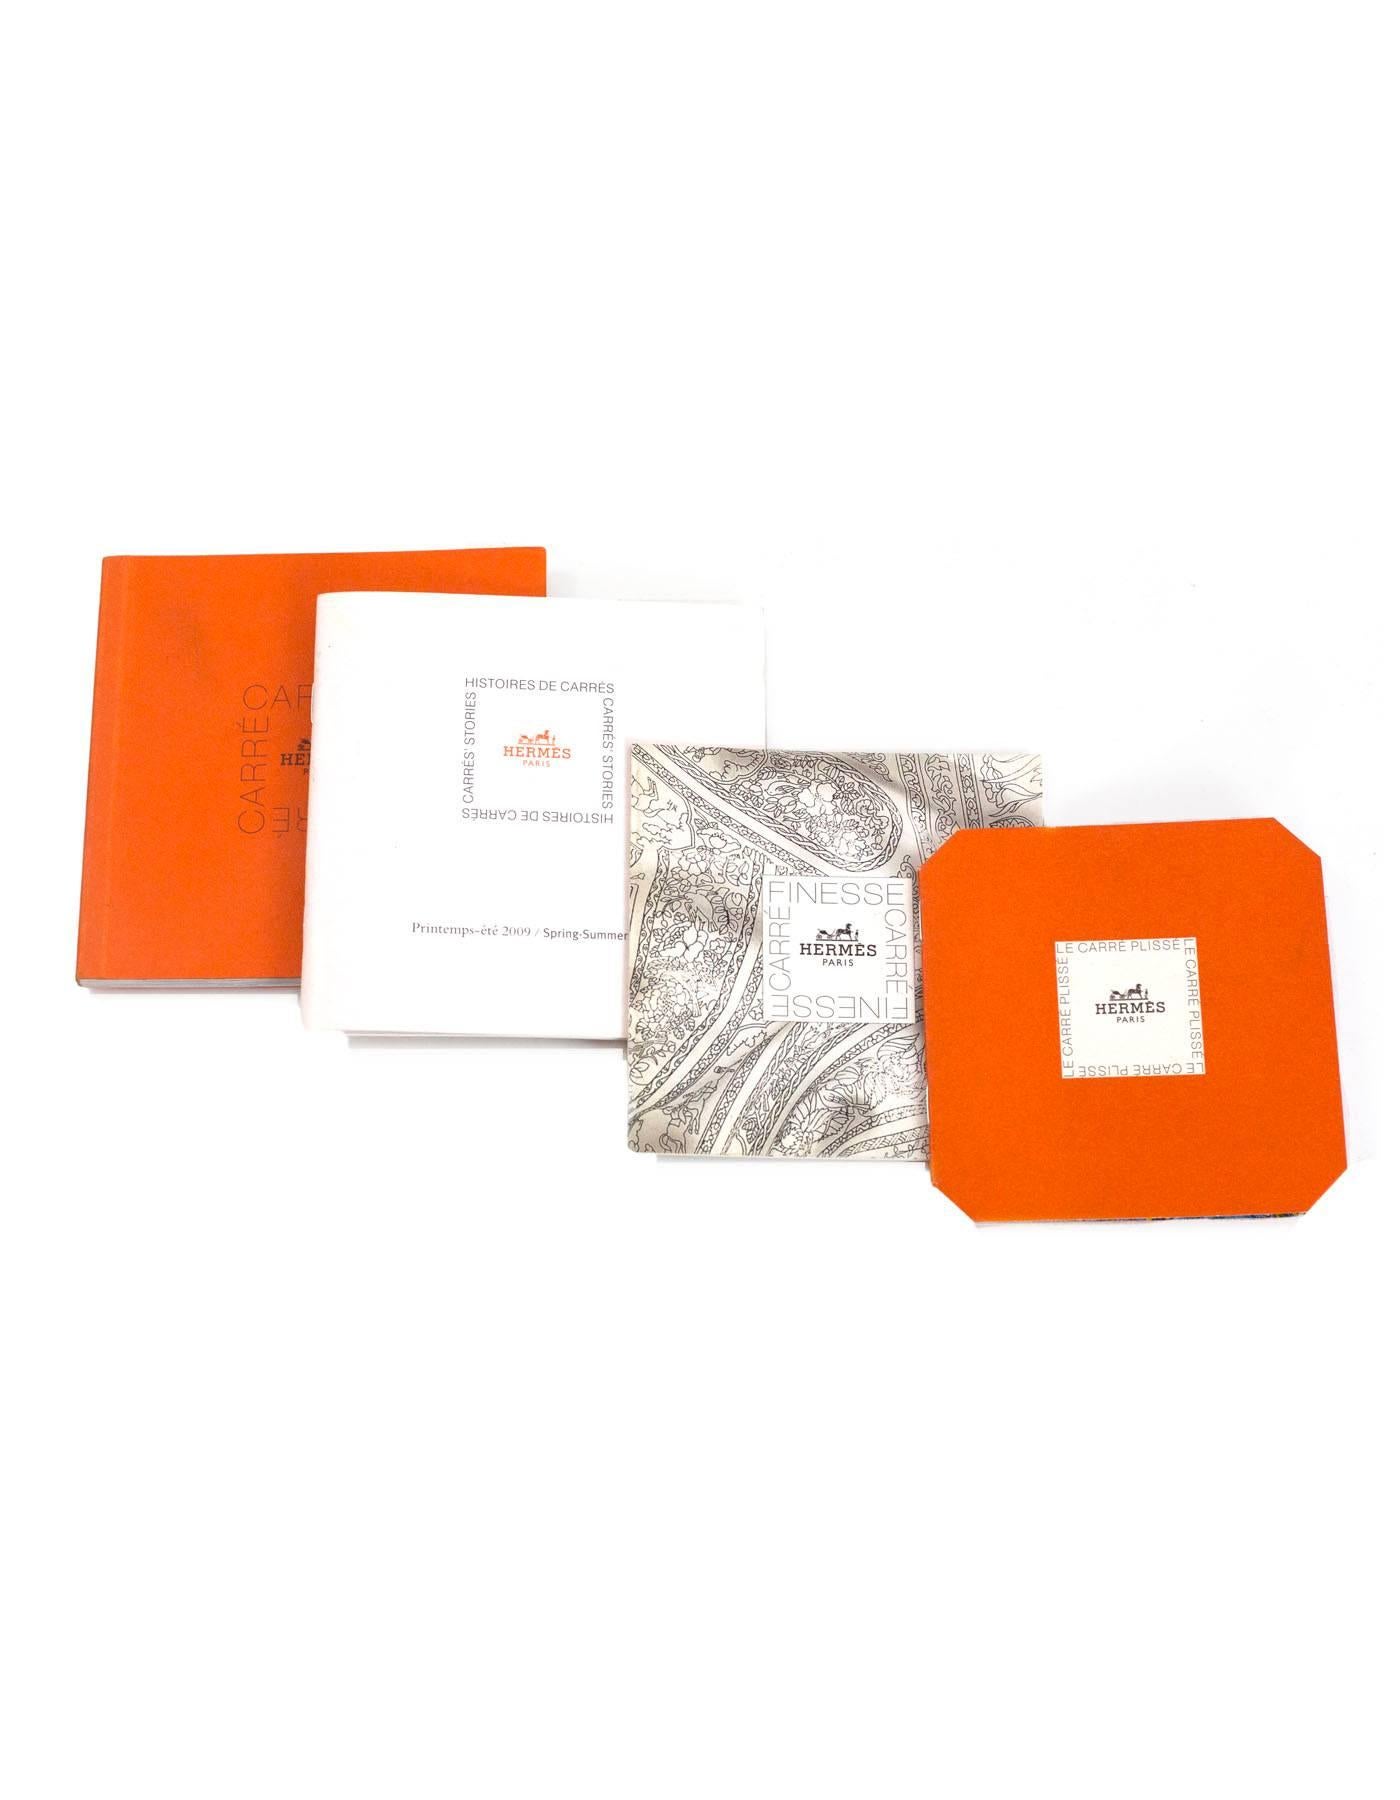 Set of 21 Hermes illustrated instruction cards featuring ways to tie Hermes scarves. Educational history booklets and Hermes shopping bag included.

Condition: Excellent pre-owned condition, minor marks at card box.

Measurements:
Knotting Cards: